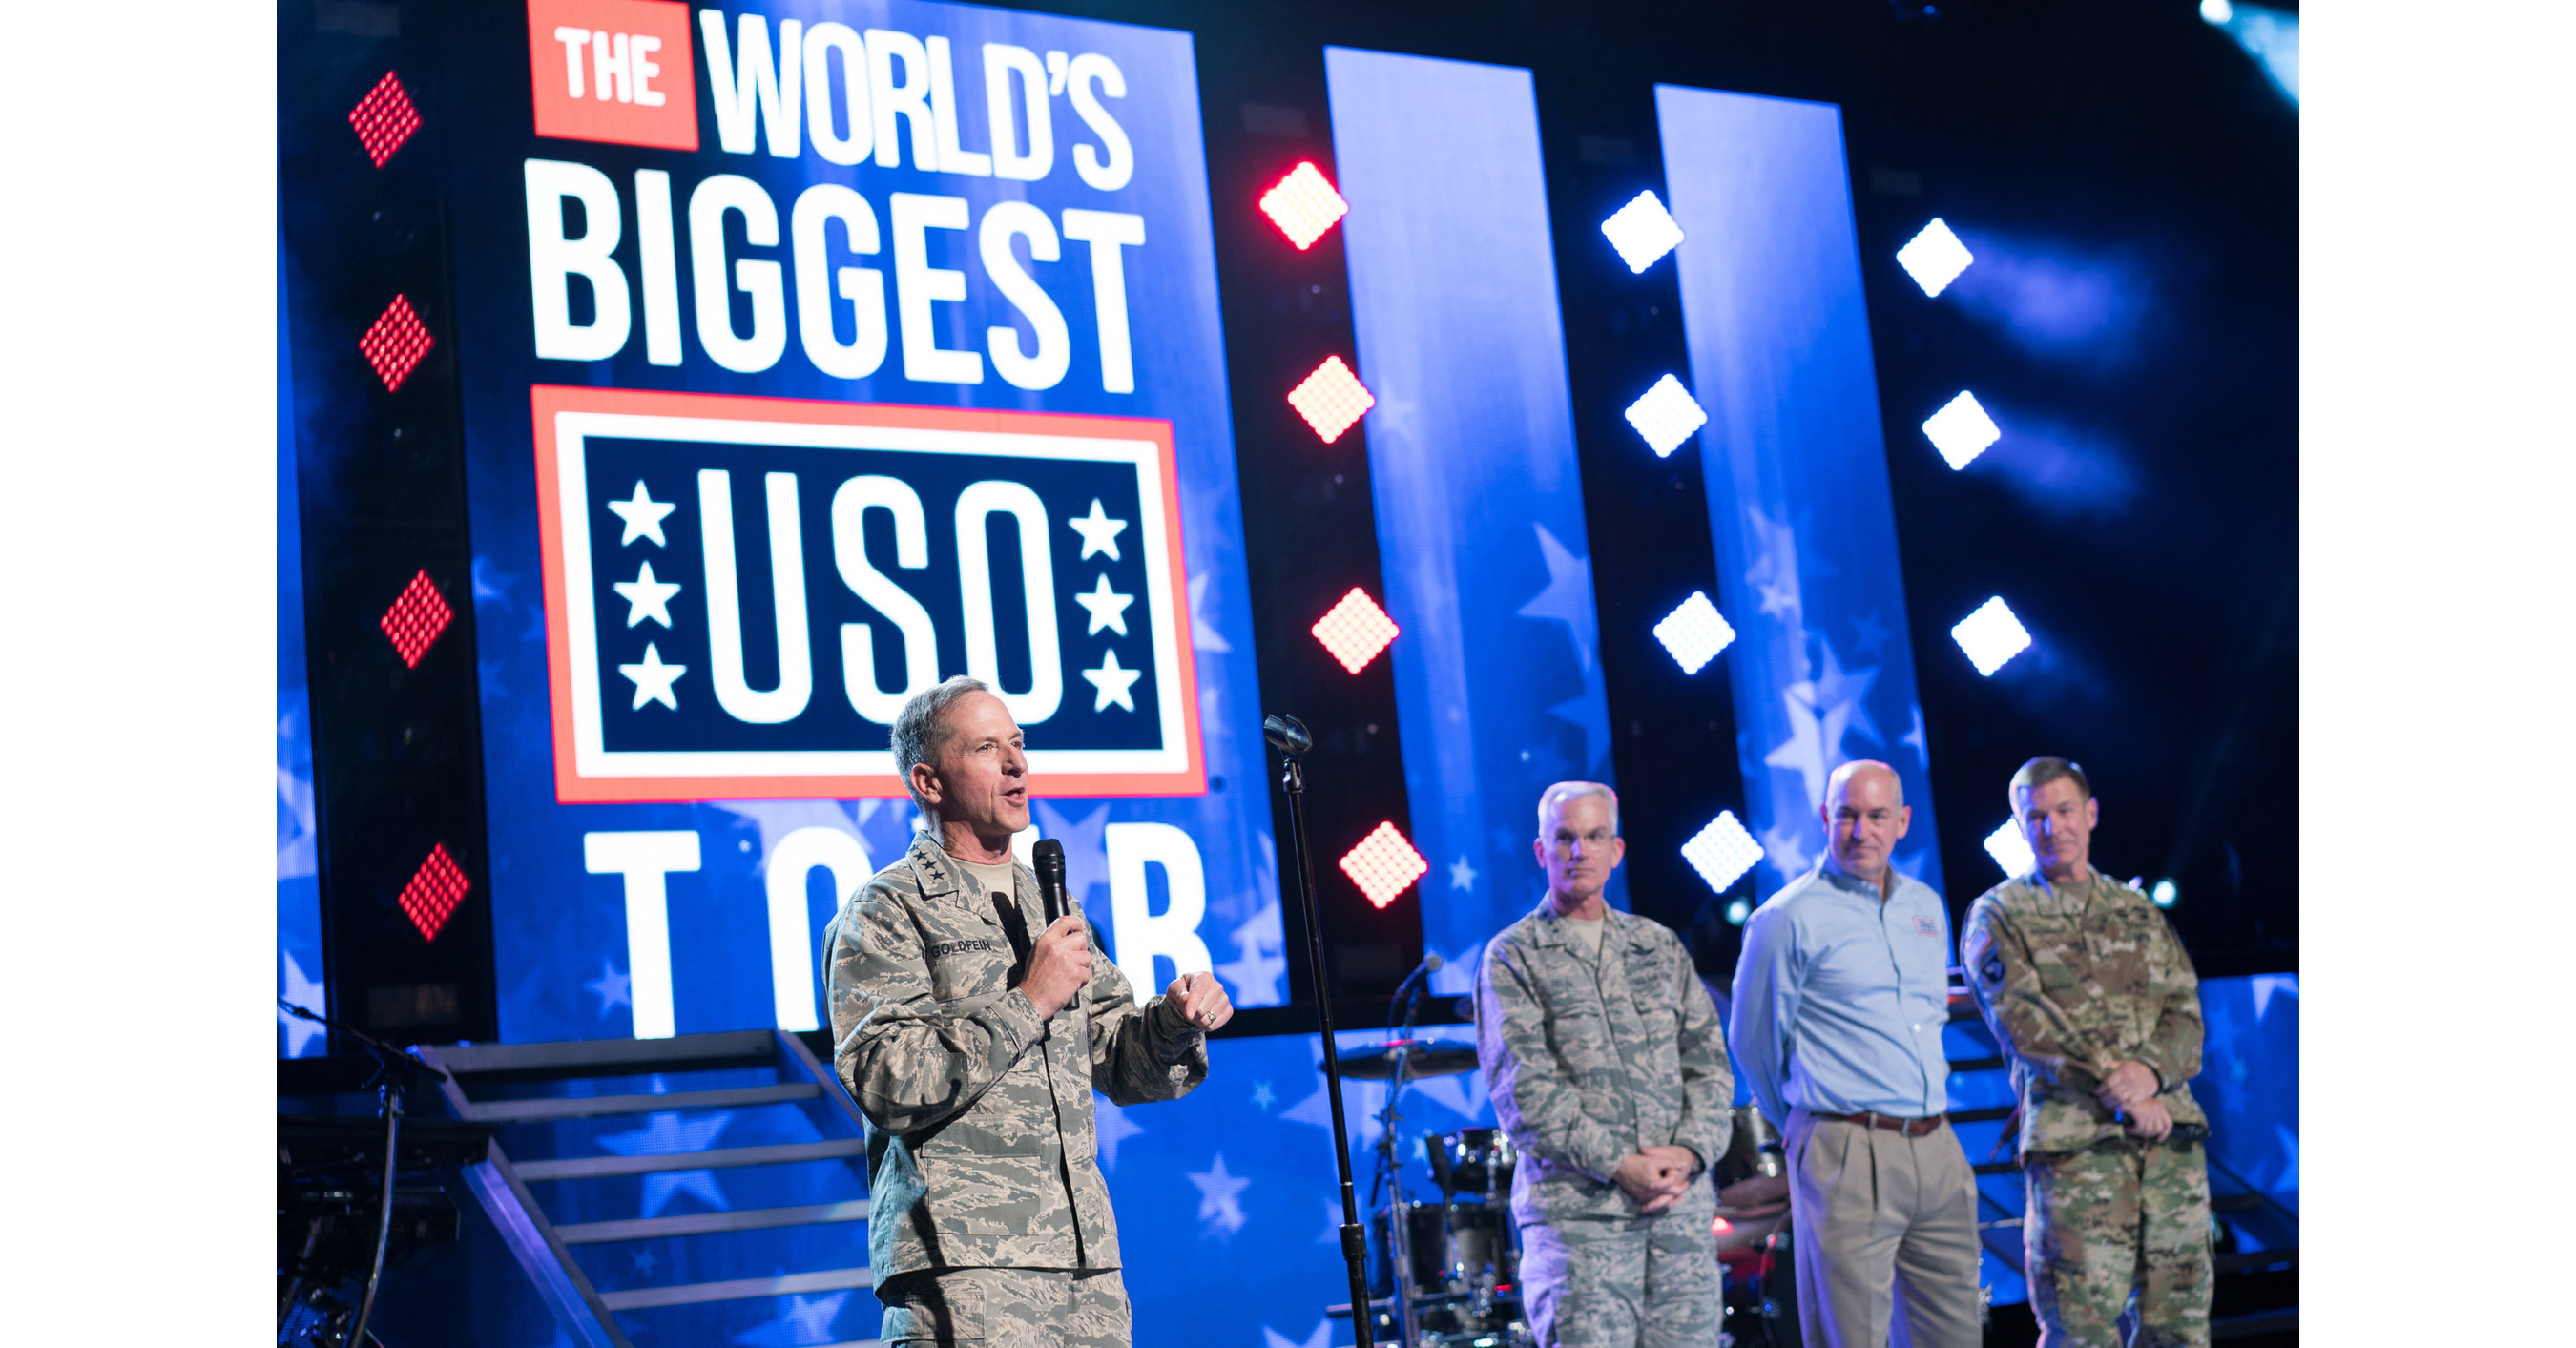 World's Biggest USO Tour Brings USO Mission To Life Through Worldwide